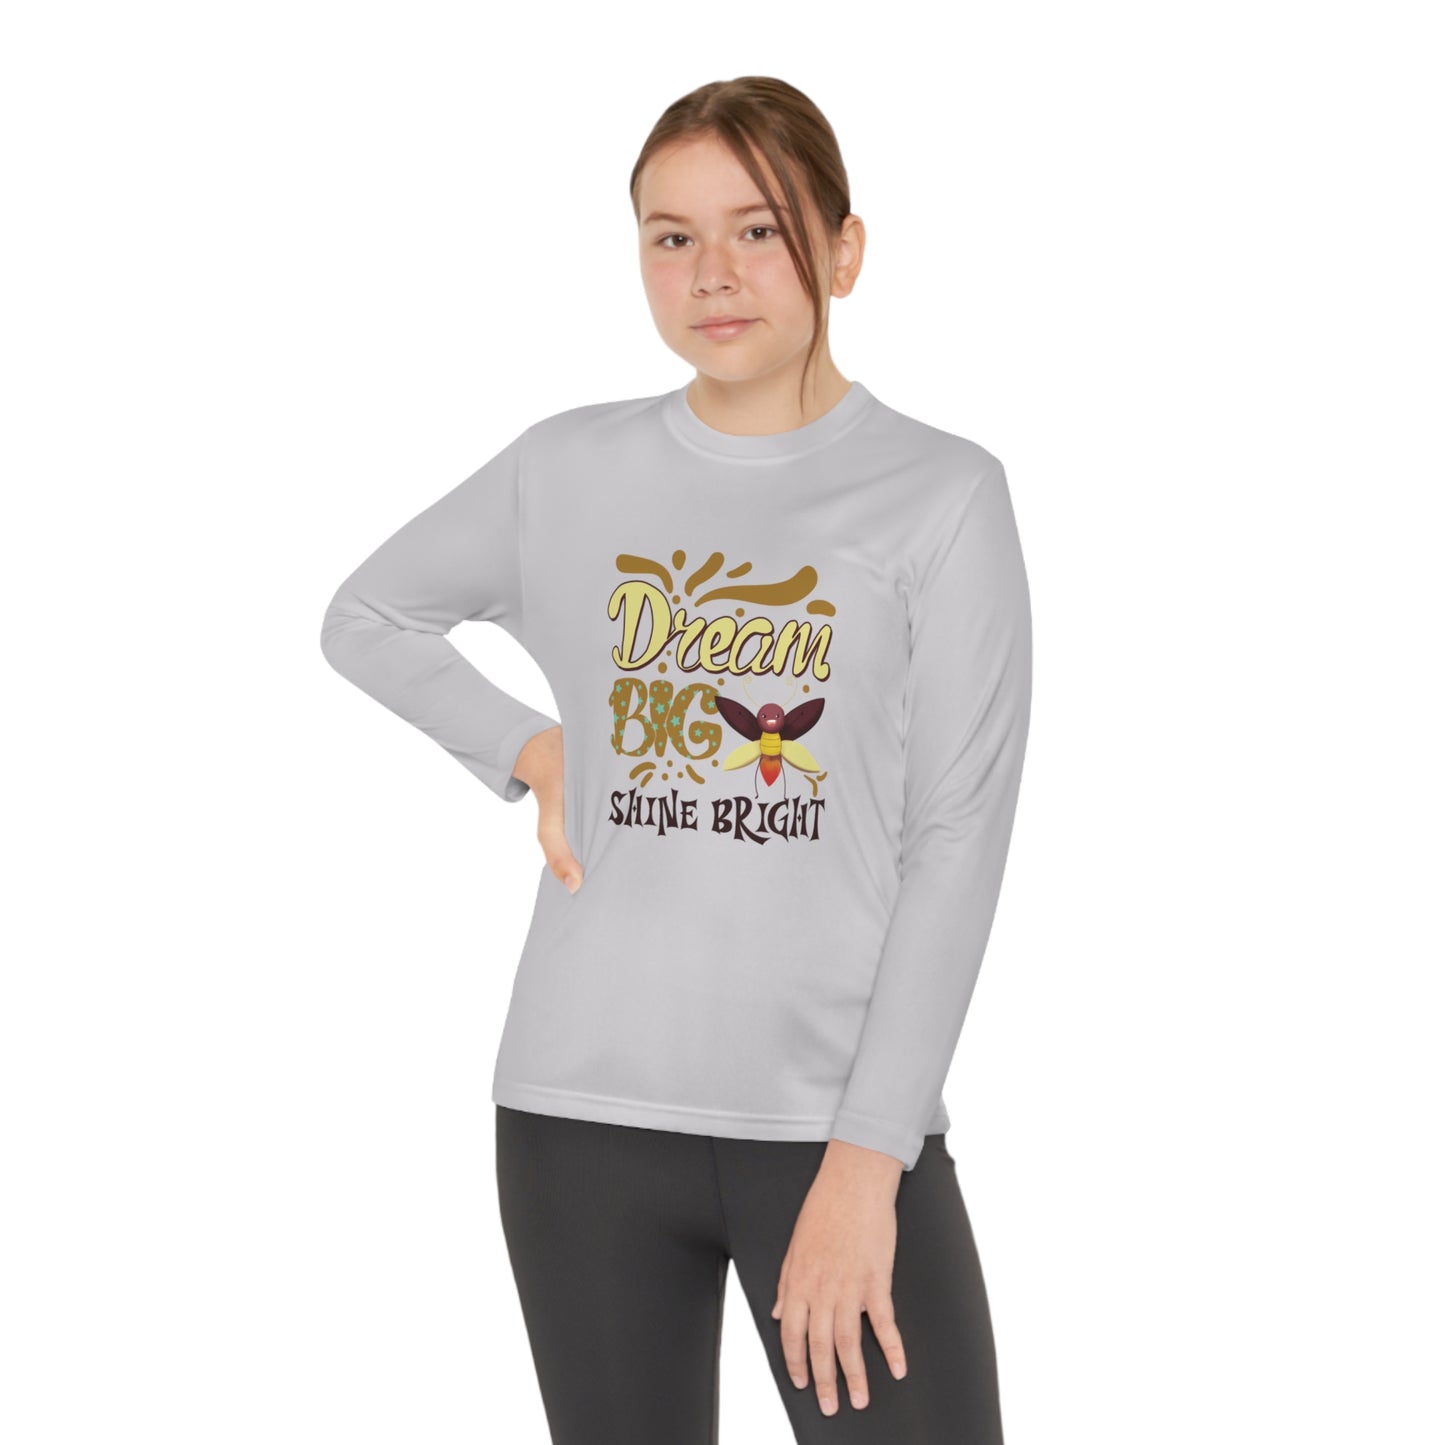 Youth Long Sleeve Competitor Tee - Dream big